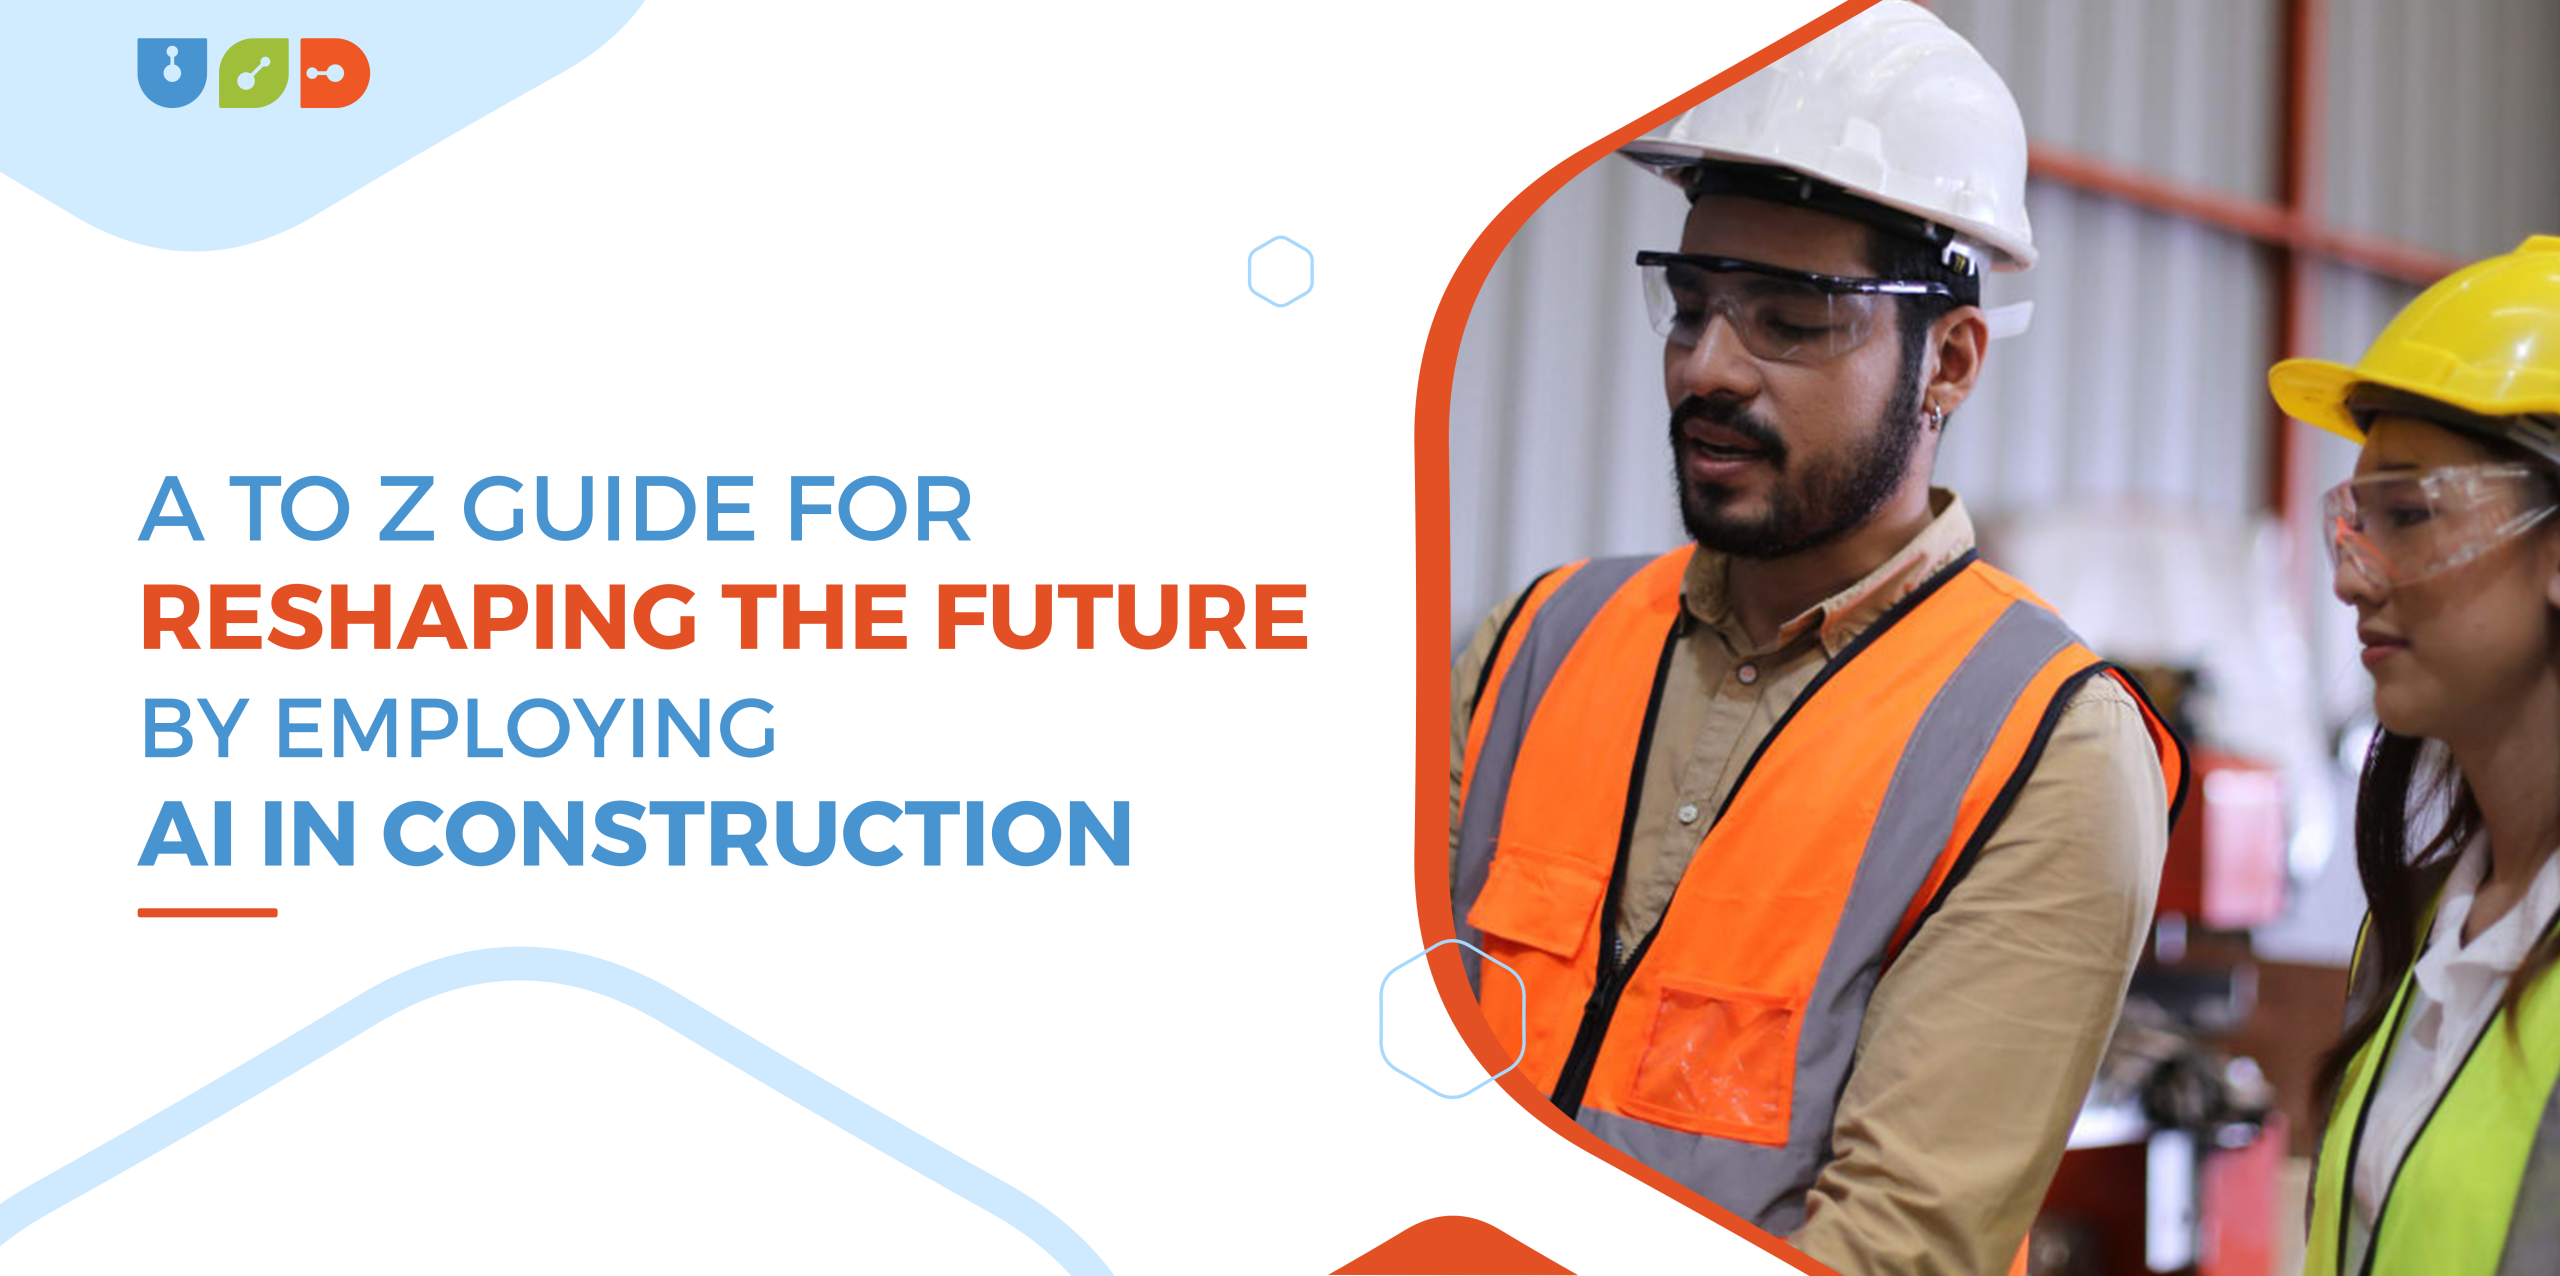 A to Z Guide for Reshaping the Future by Employing AI in Construction